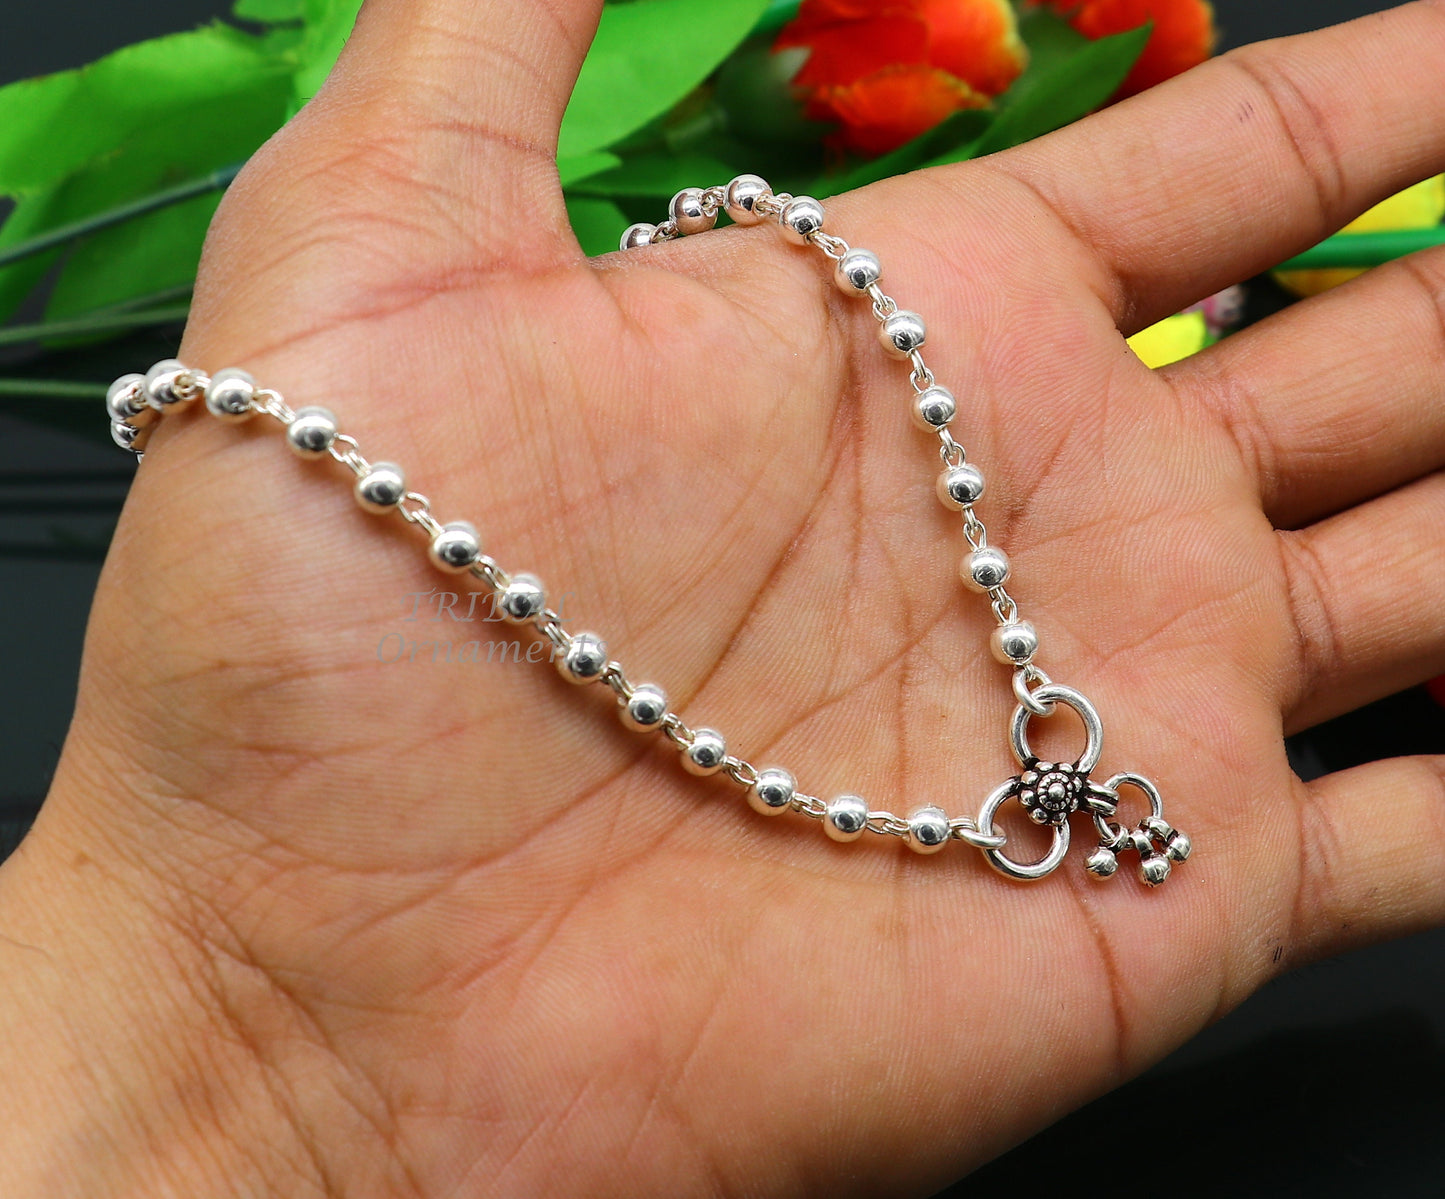 4.5mm 9"to 12" 925 sterling silver beaded/ball chain anklet bracelet amazing light weight delicate anklets belly dance silver jewelry ank537 - TRIBAL ORNAMENTS